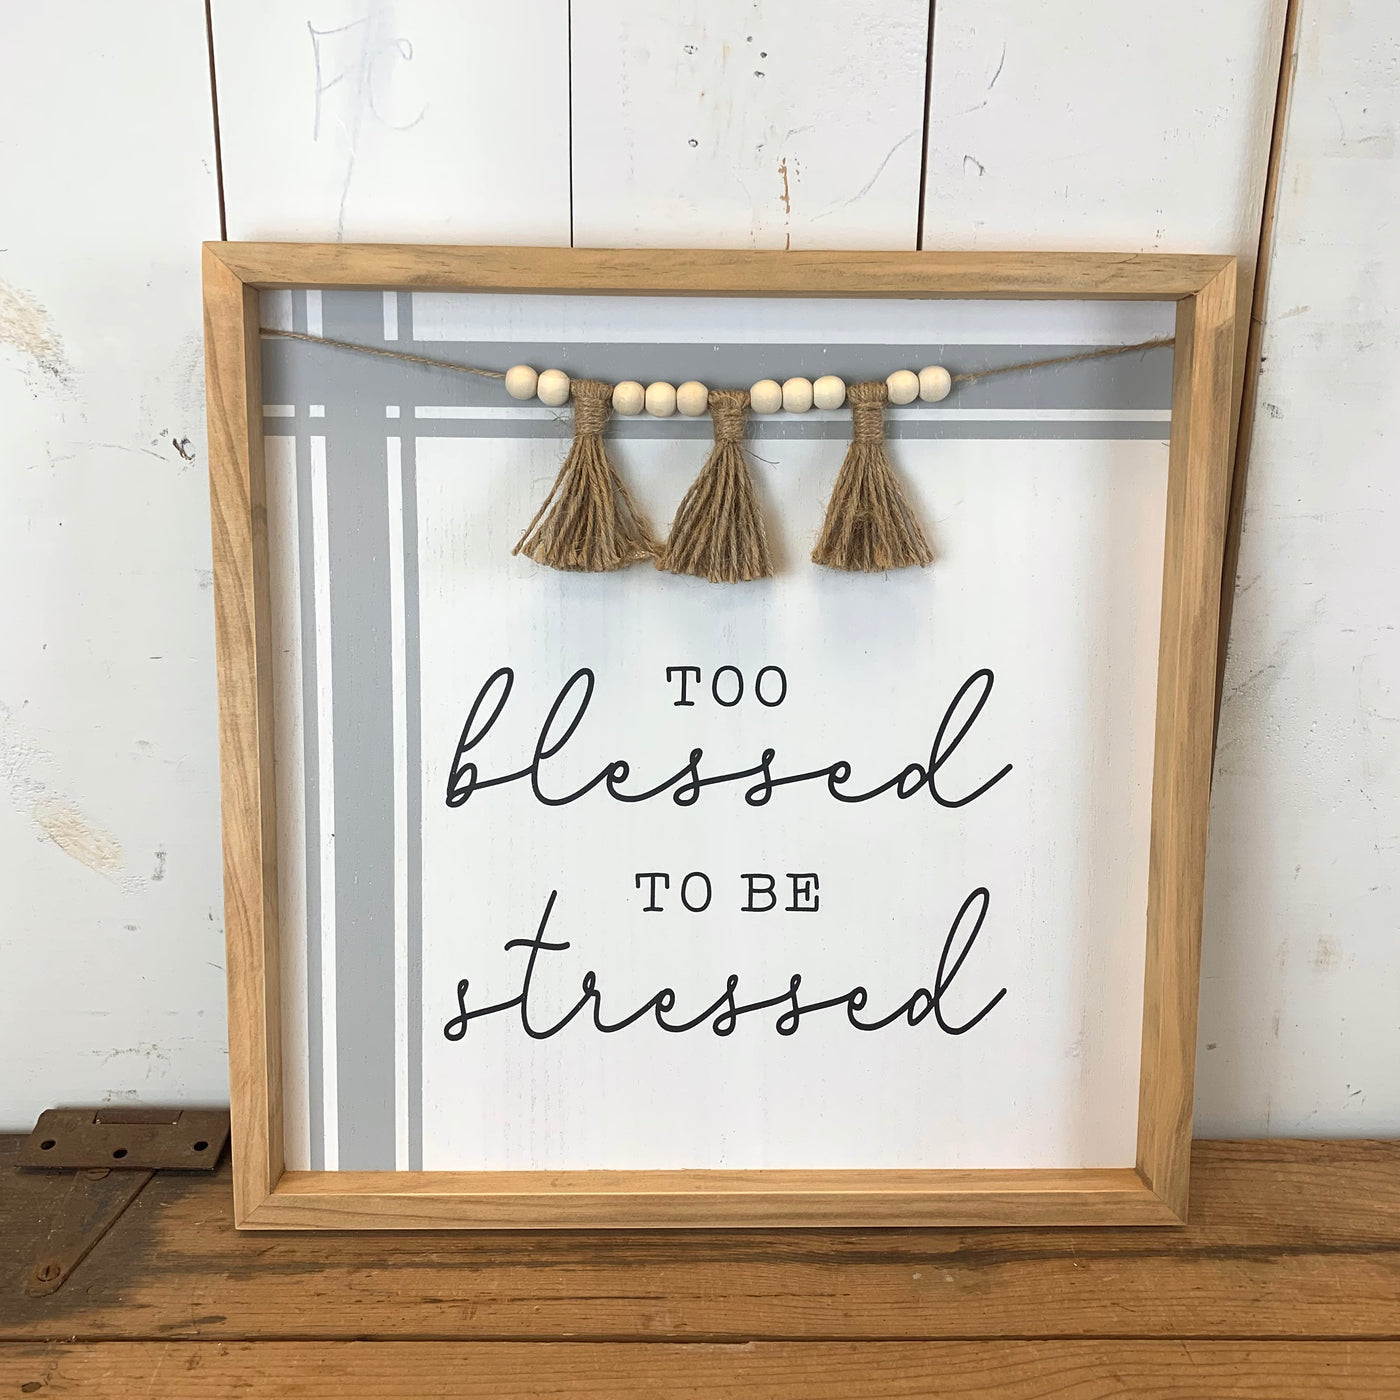 "Too Blessed to be Stressed" - "Throw Kindness around like Confetti" Signage